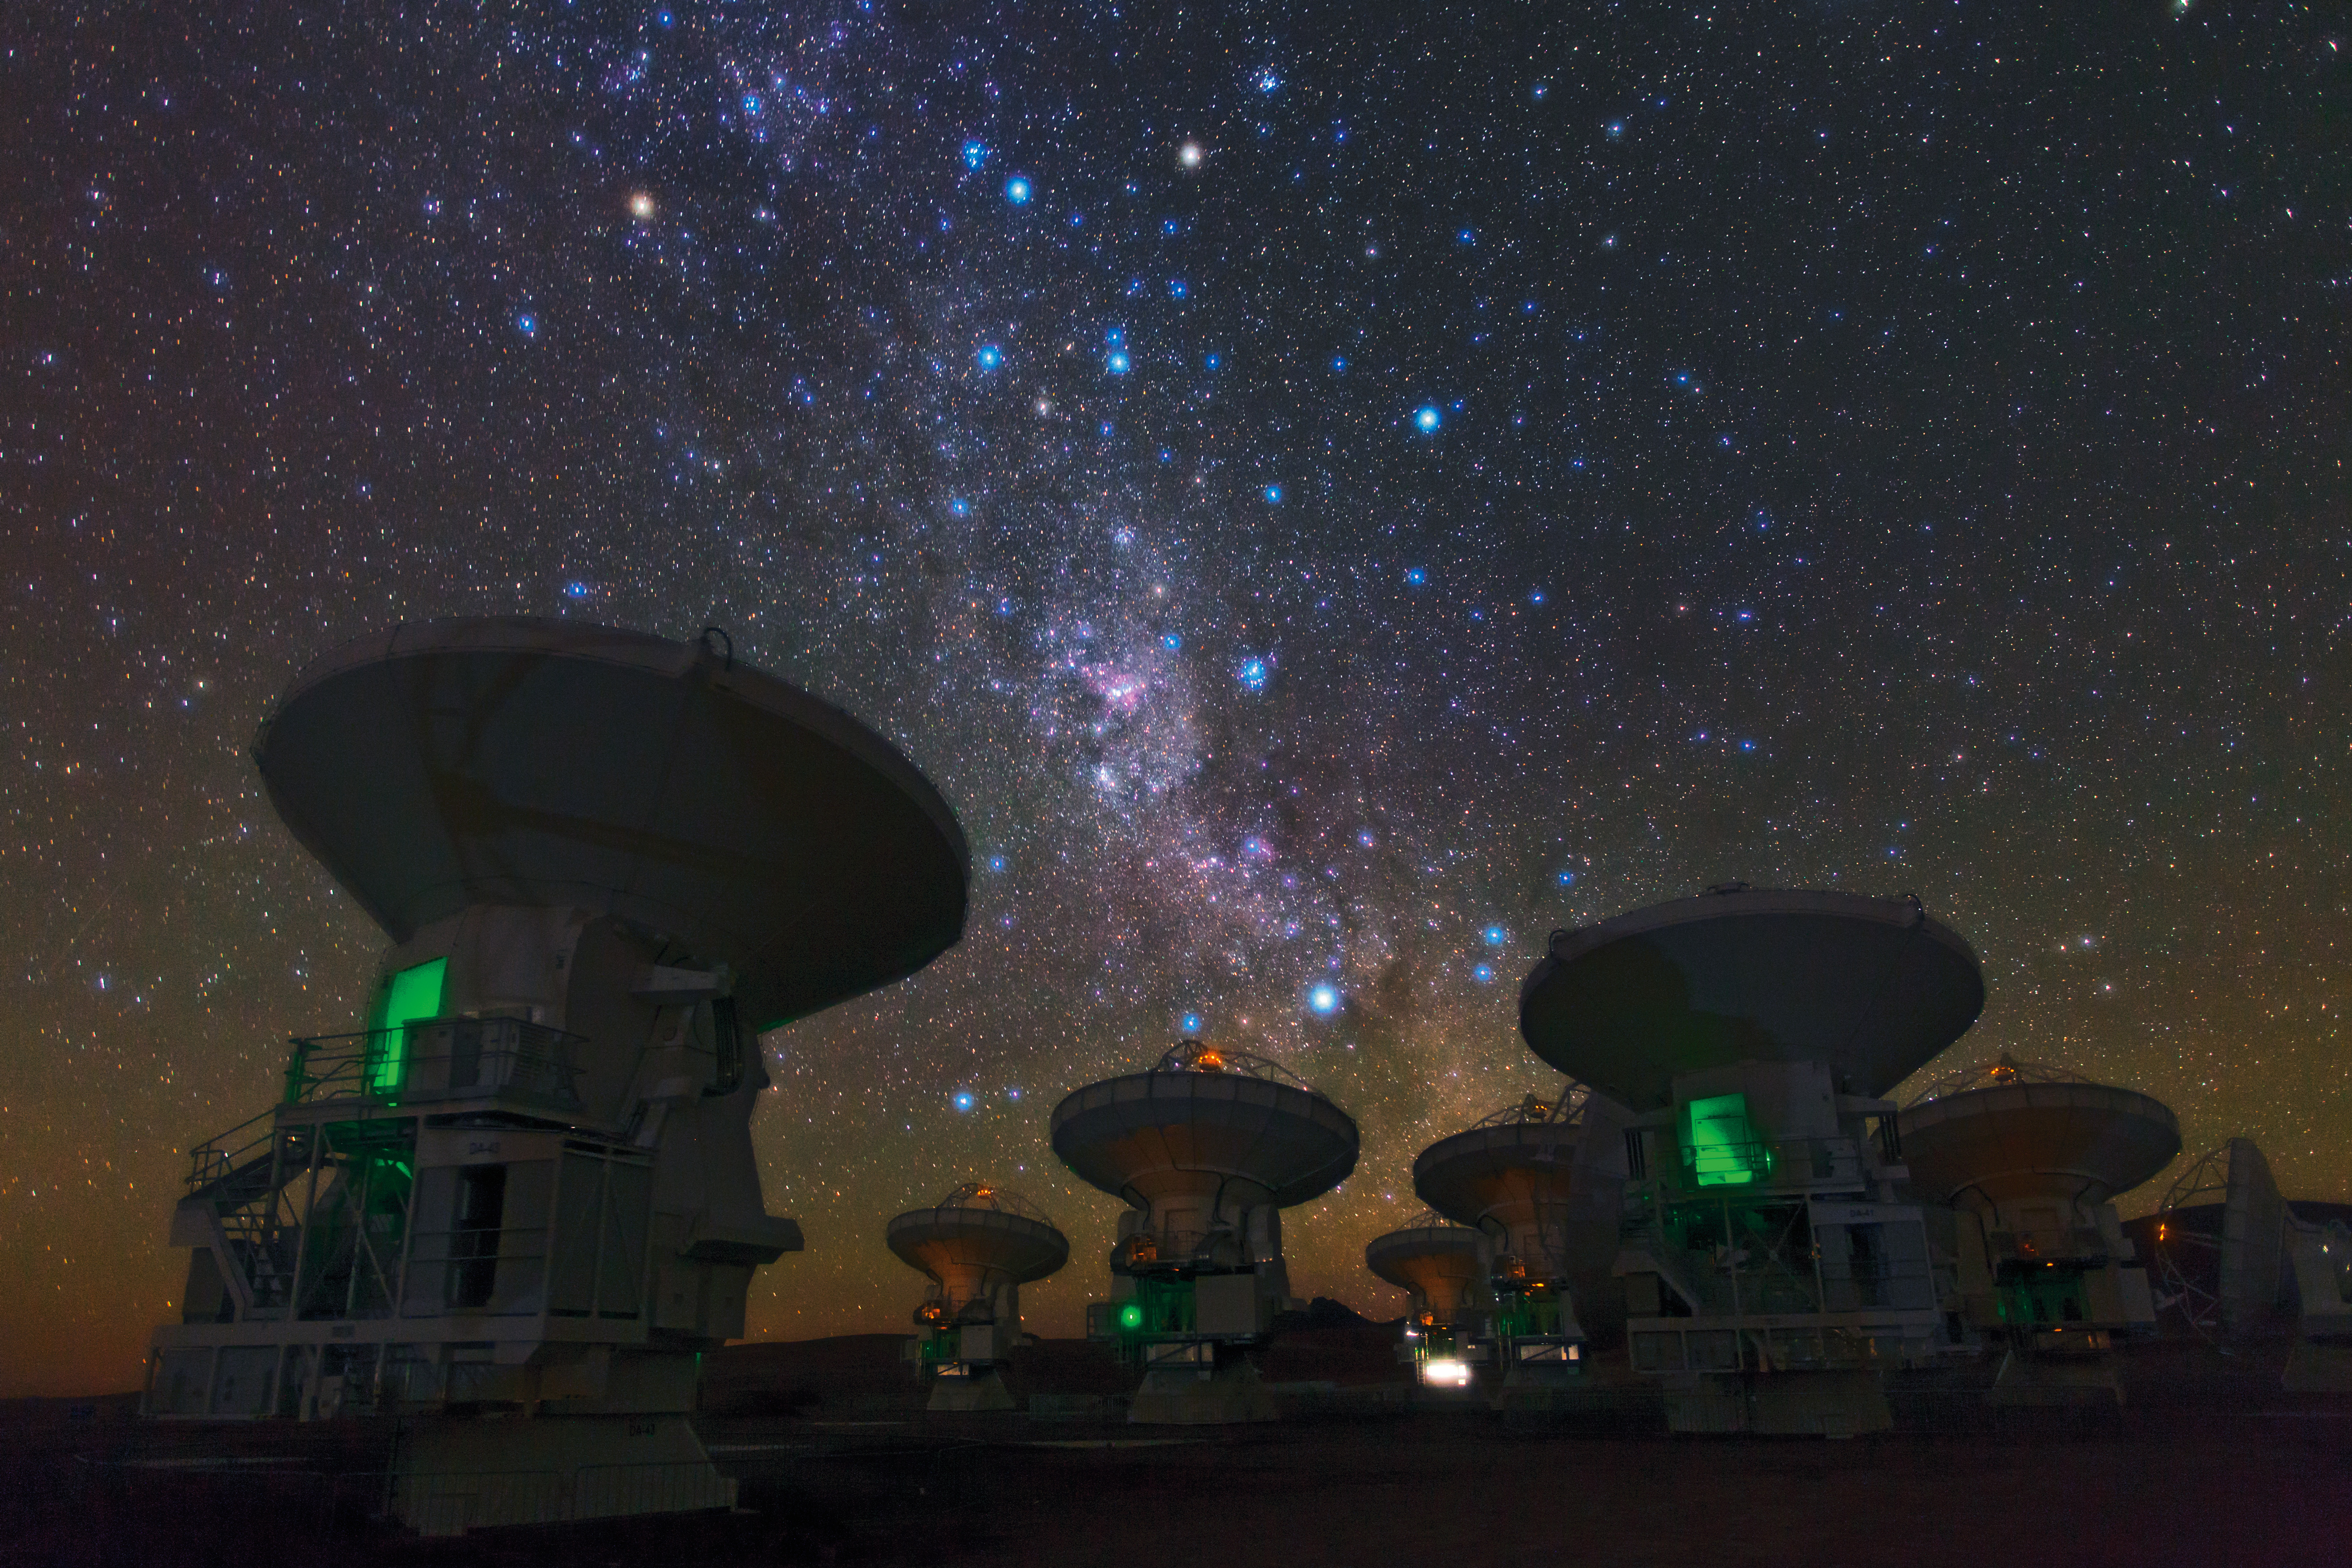 A nighttime photo shows satellite dishes on Earth pointing straight up into the starlit sky, where the Milky Way and various bright stars are conspicuously visible